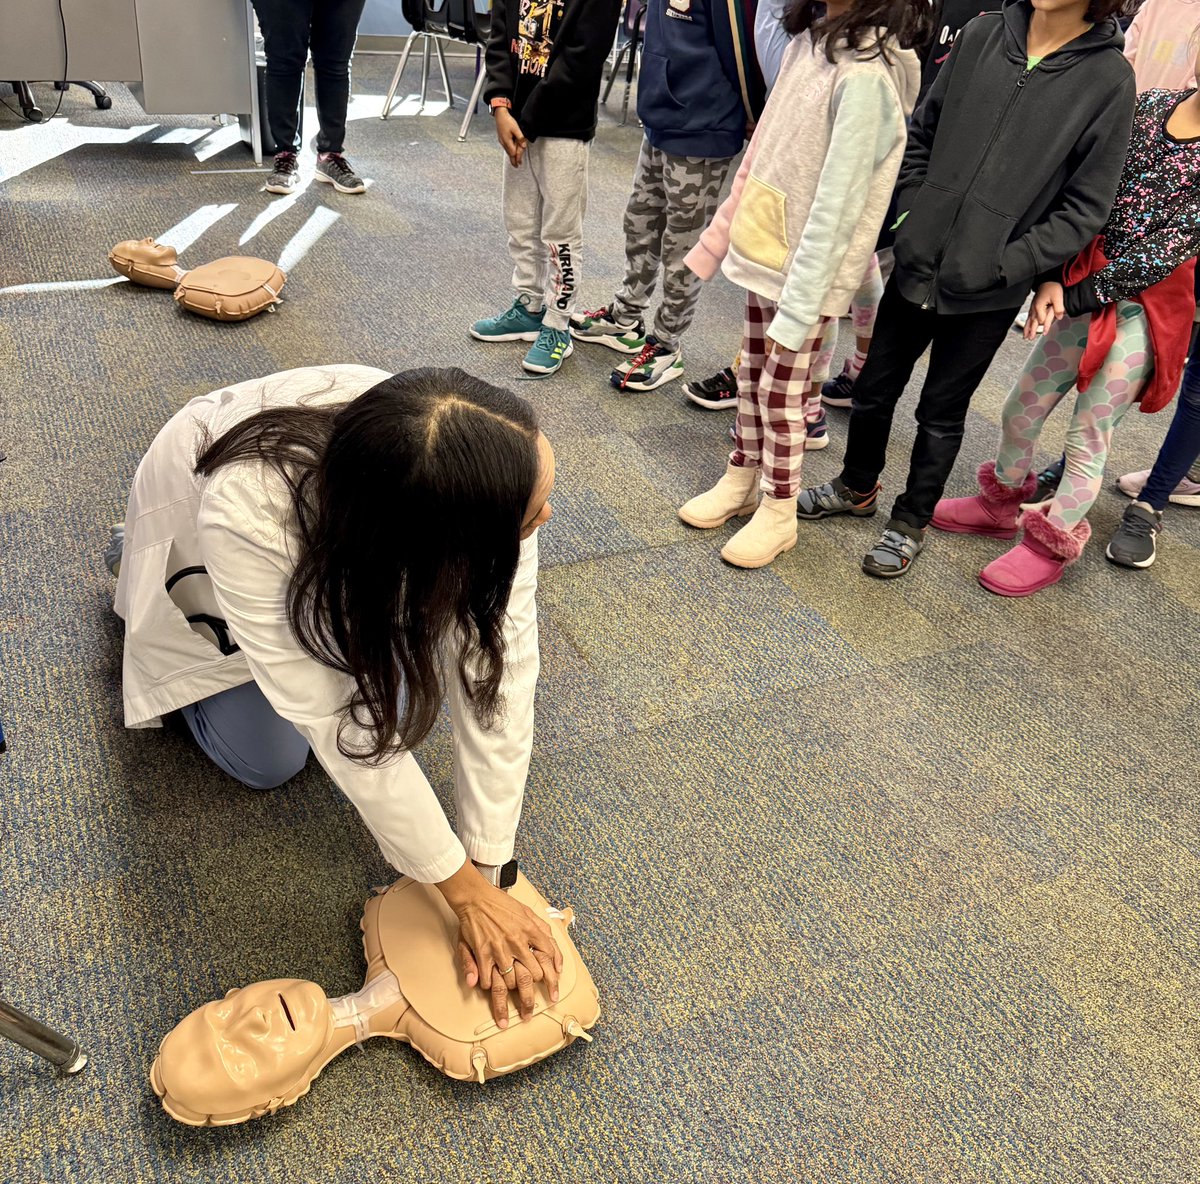 I enjoyed teaching my daughter’s 2nd grade class about #heart anatomy, #hearthealth, and my work as a #cardiologist. They loved learning #CPR using the #BabyShark song to help them maintain compressions at a rate of 100 beats per minute. Such a rewarding experience!❤️ #HeartMonth